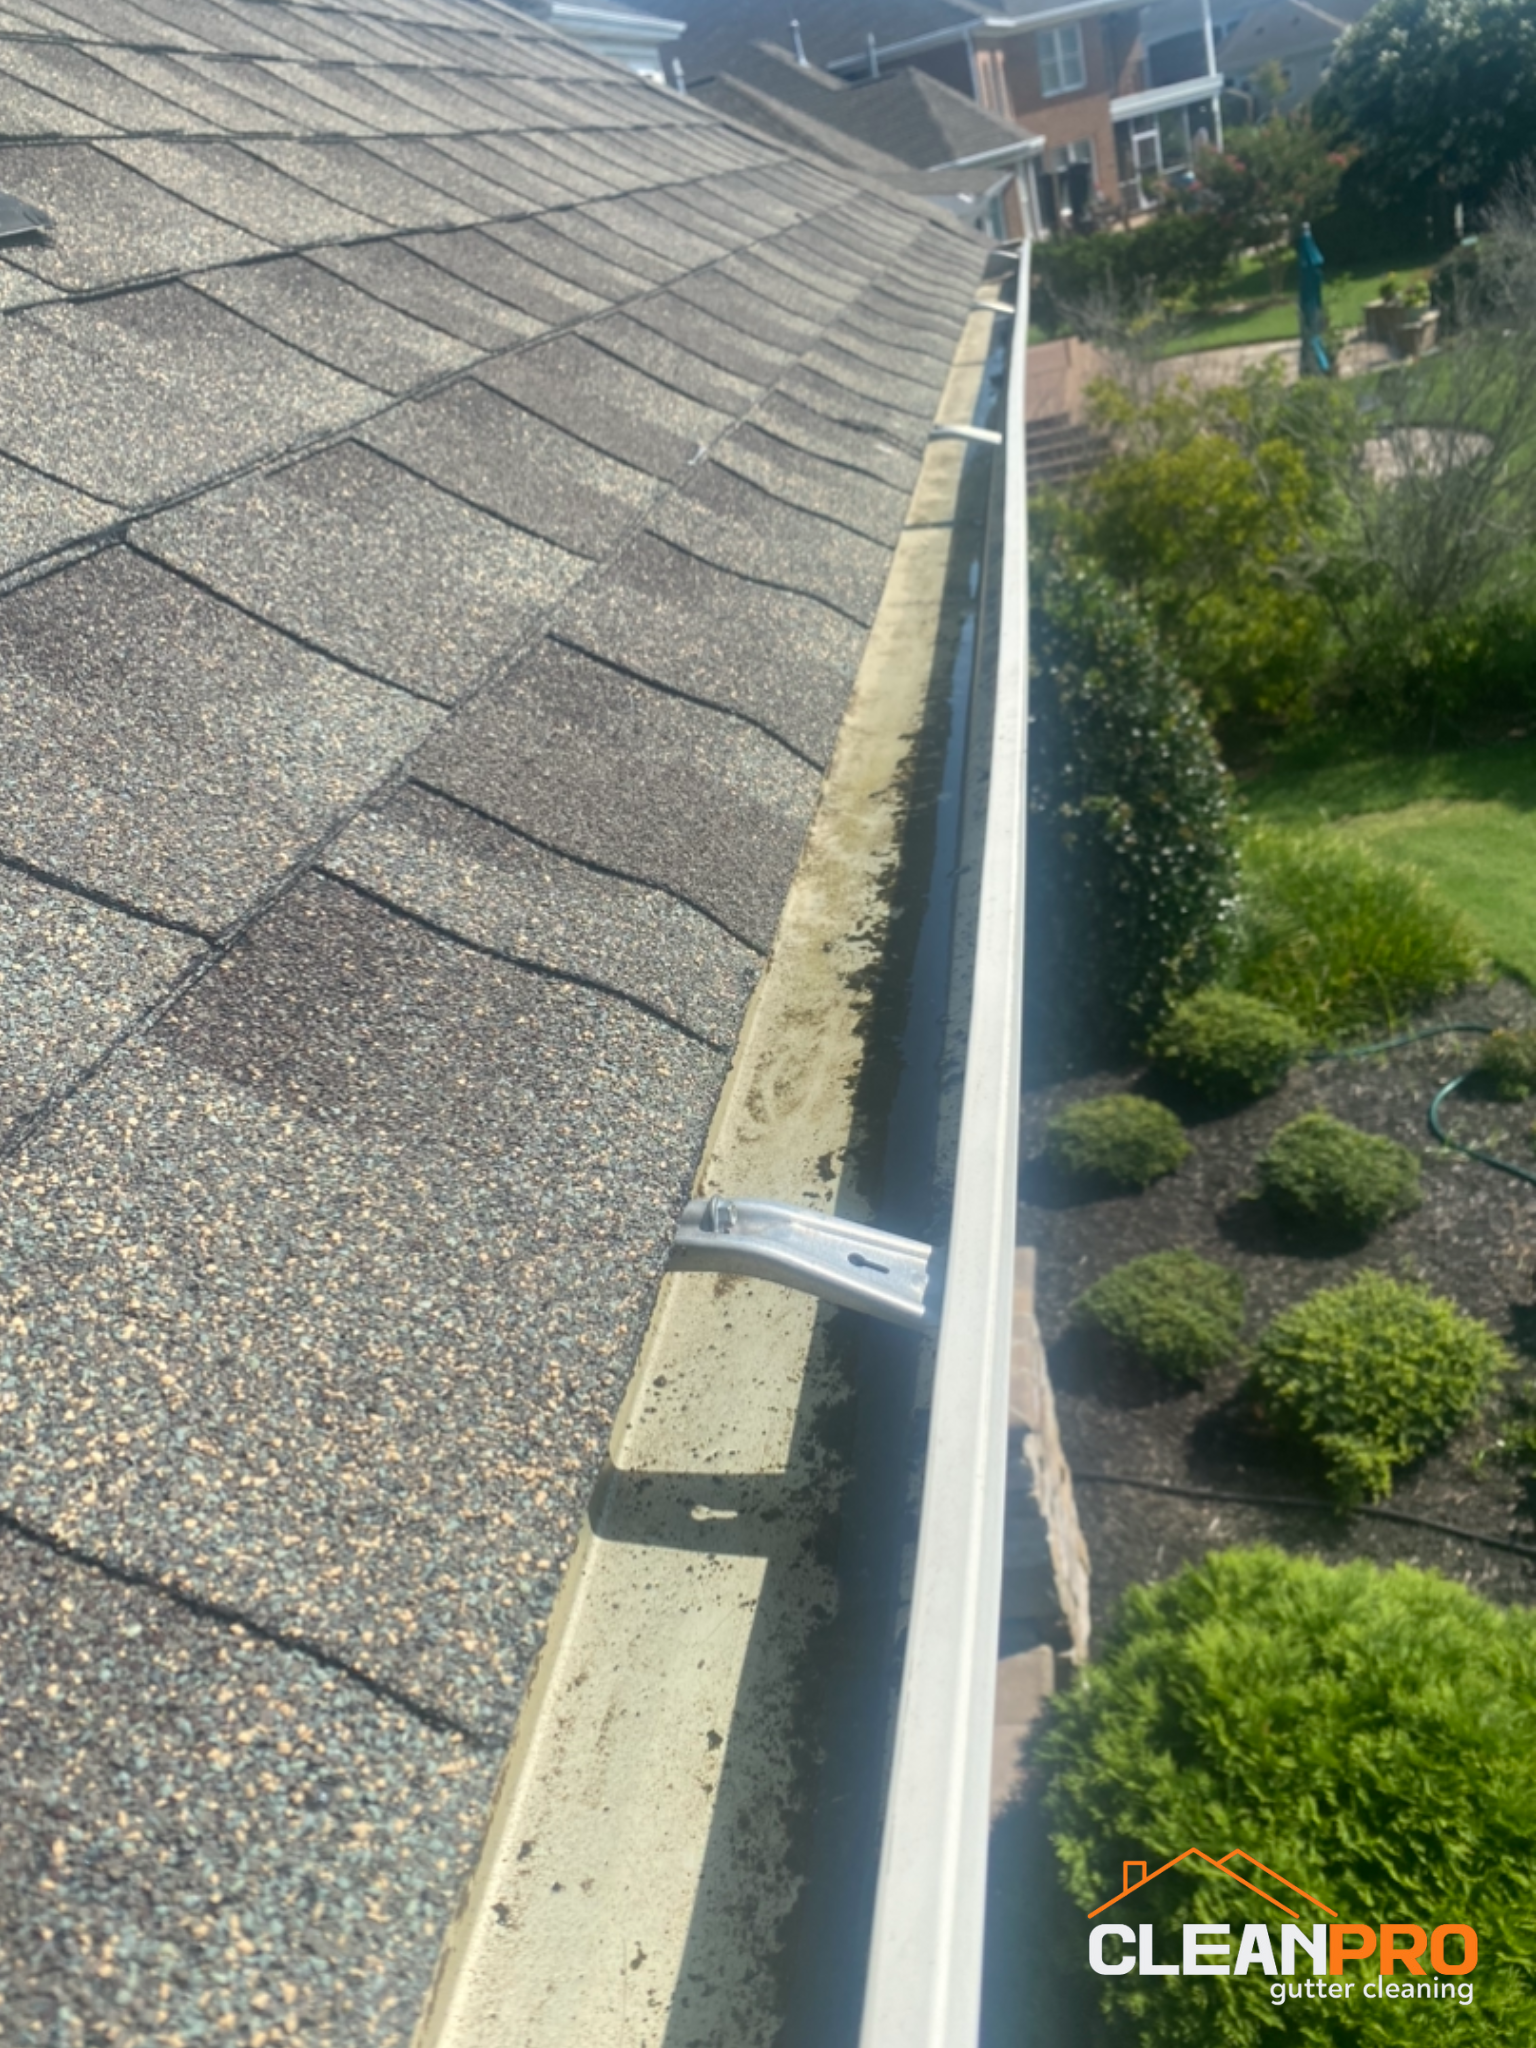 Quality Gutter Cleaning in Tulsa OK